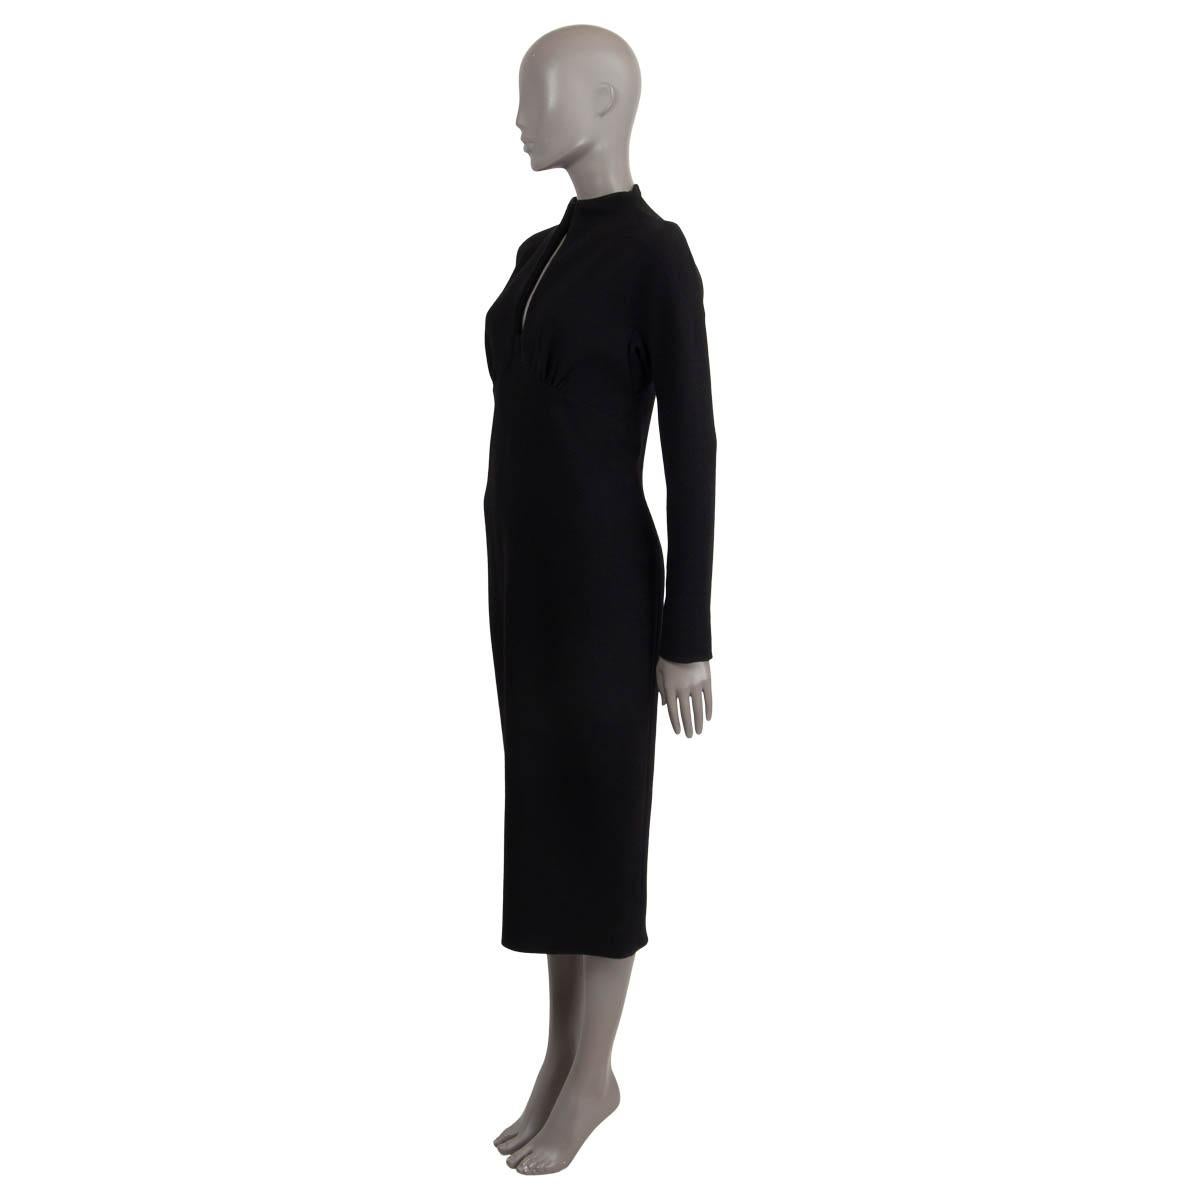 100% authentic Bottega Veneta stand collar maxi dress in black wool (assumed cause tag is missing). Features long raglan sleeves (sleeve measurements taken from the neck), zipped cuffs and a v-neck. Opens with a concealed zipper and a hook on the